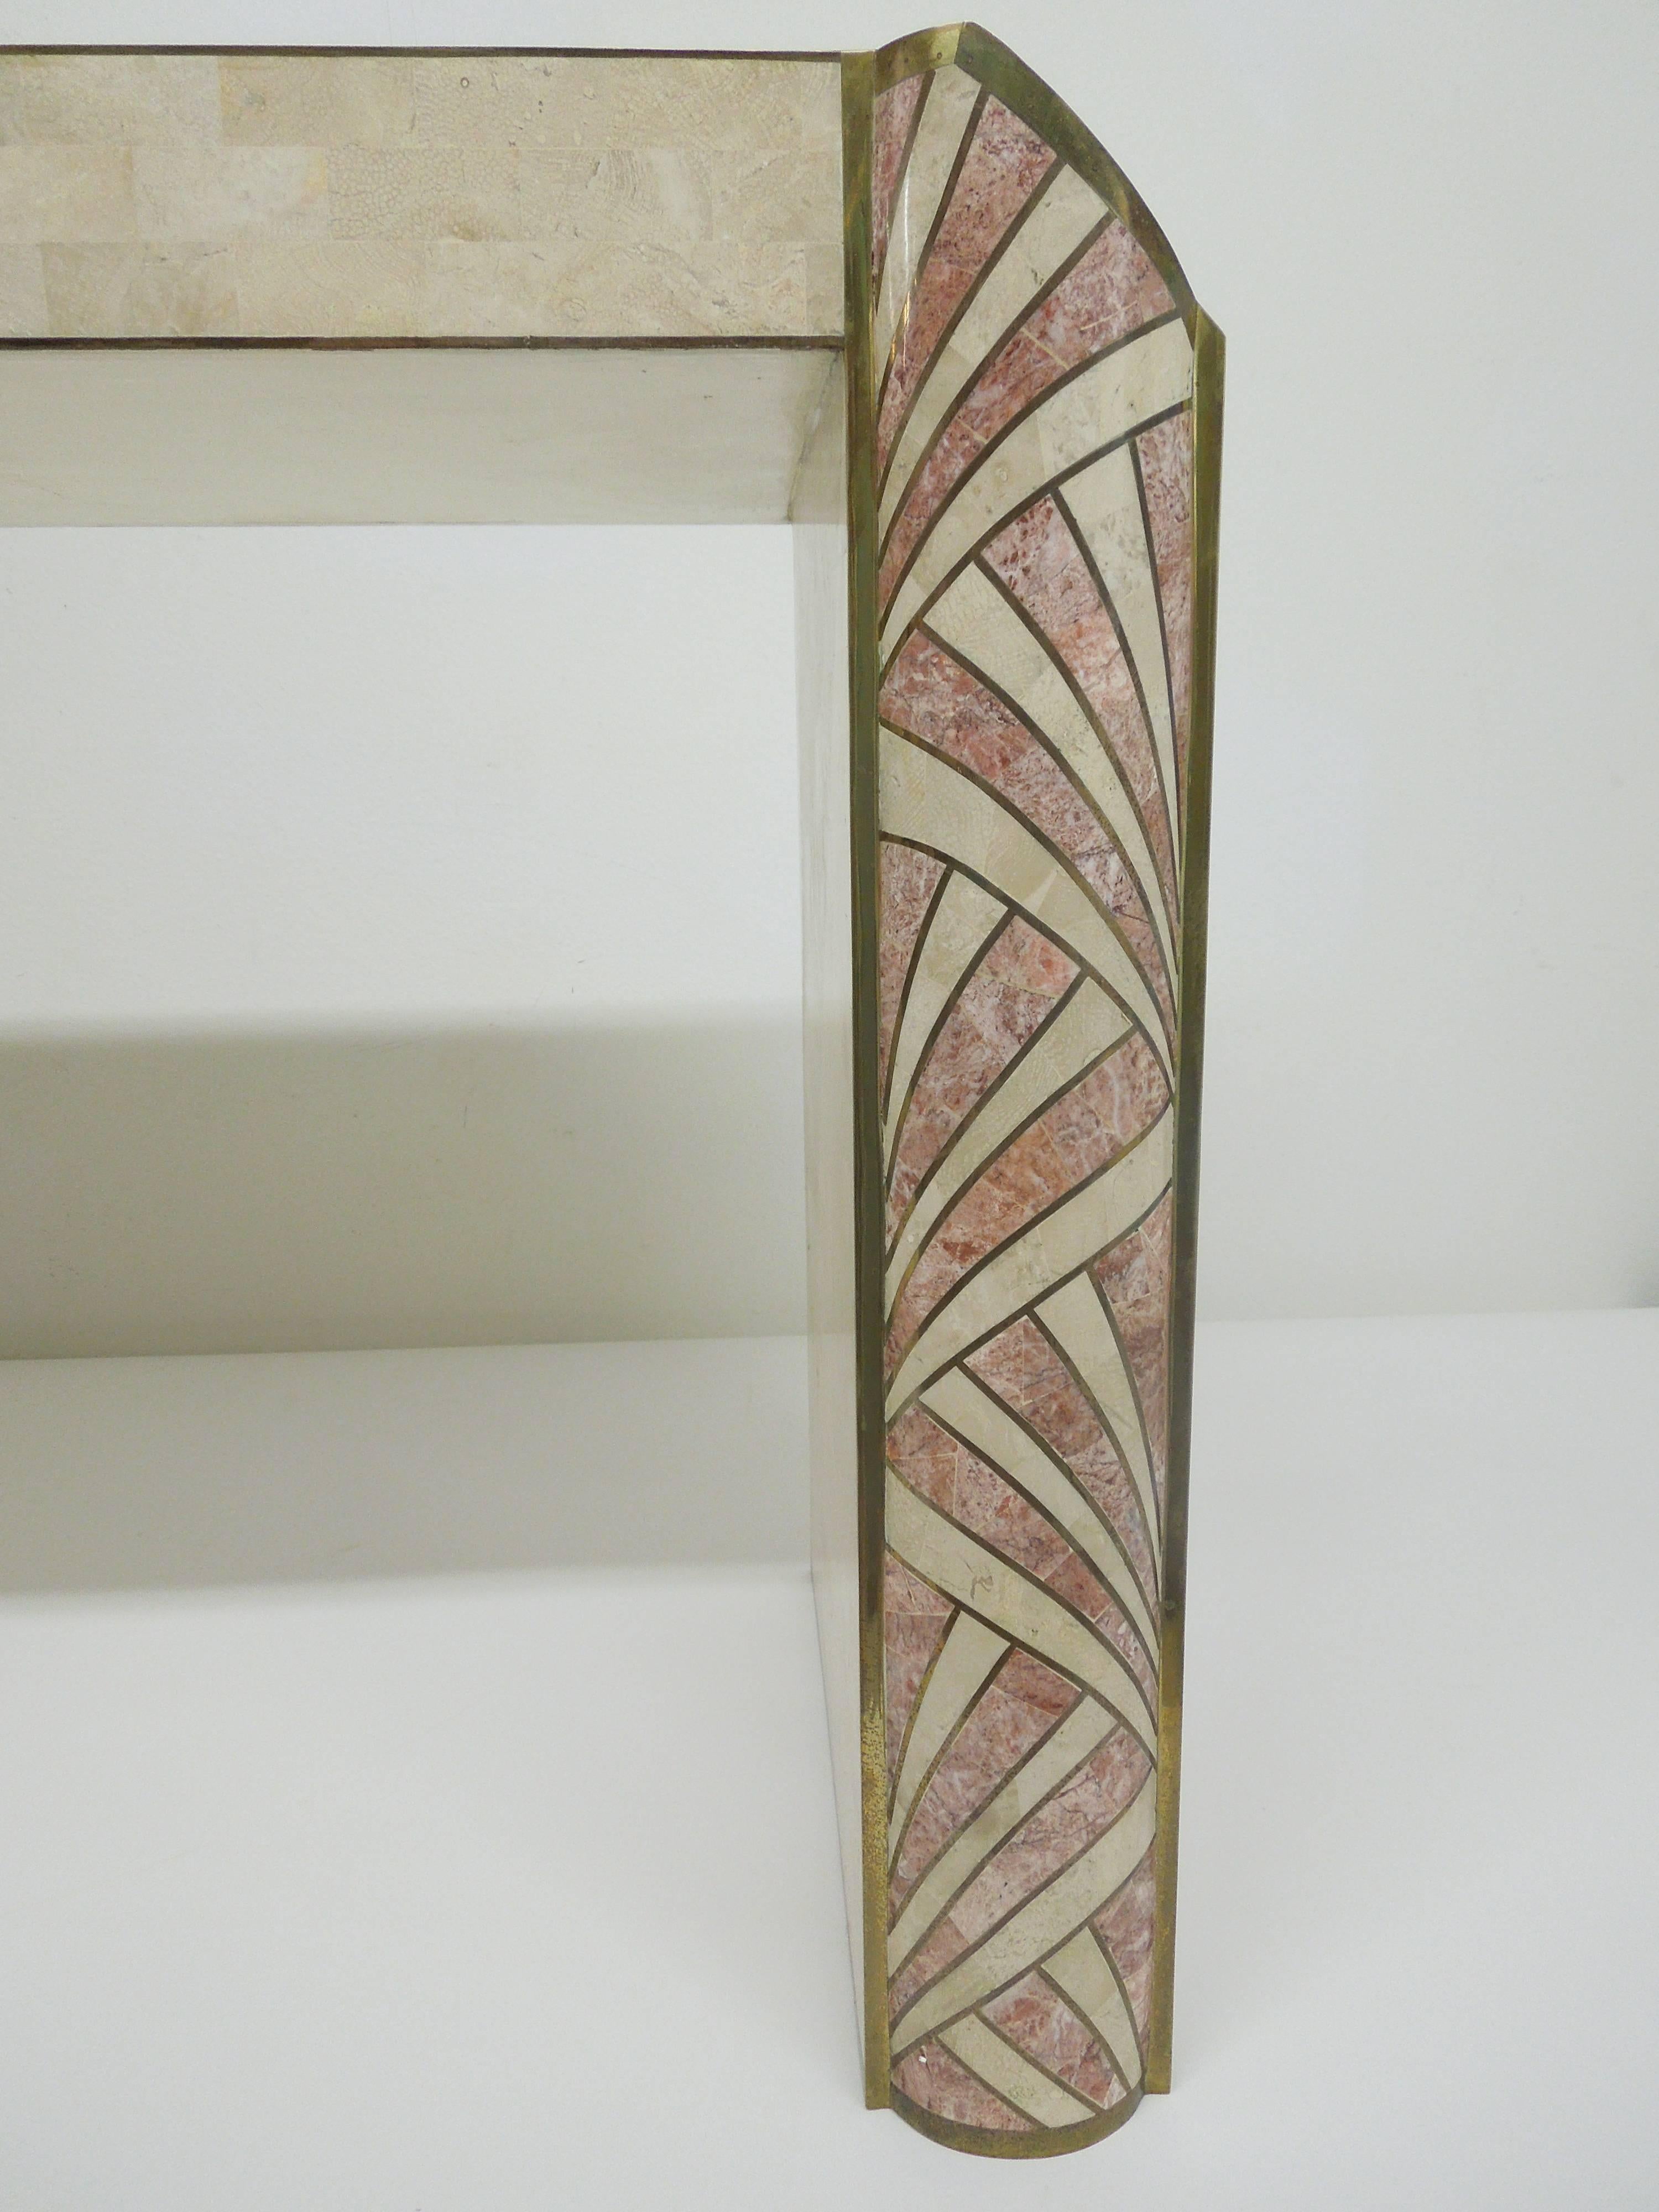 A handmade console table made of inlaid tessellated stone by Maitland-Smith. Brass trim. Ivory stone and rose color marble inlay. Signed on bottom with Maitland-Smith label.